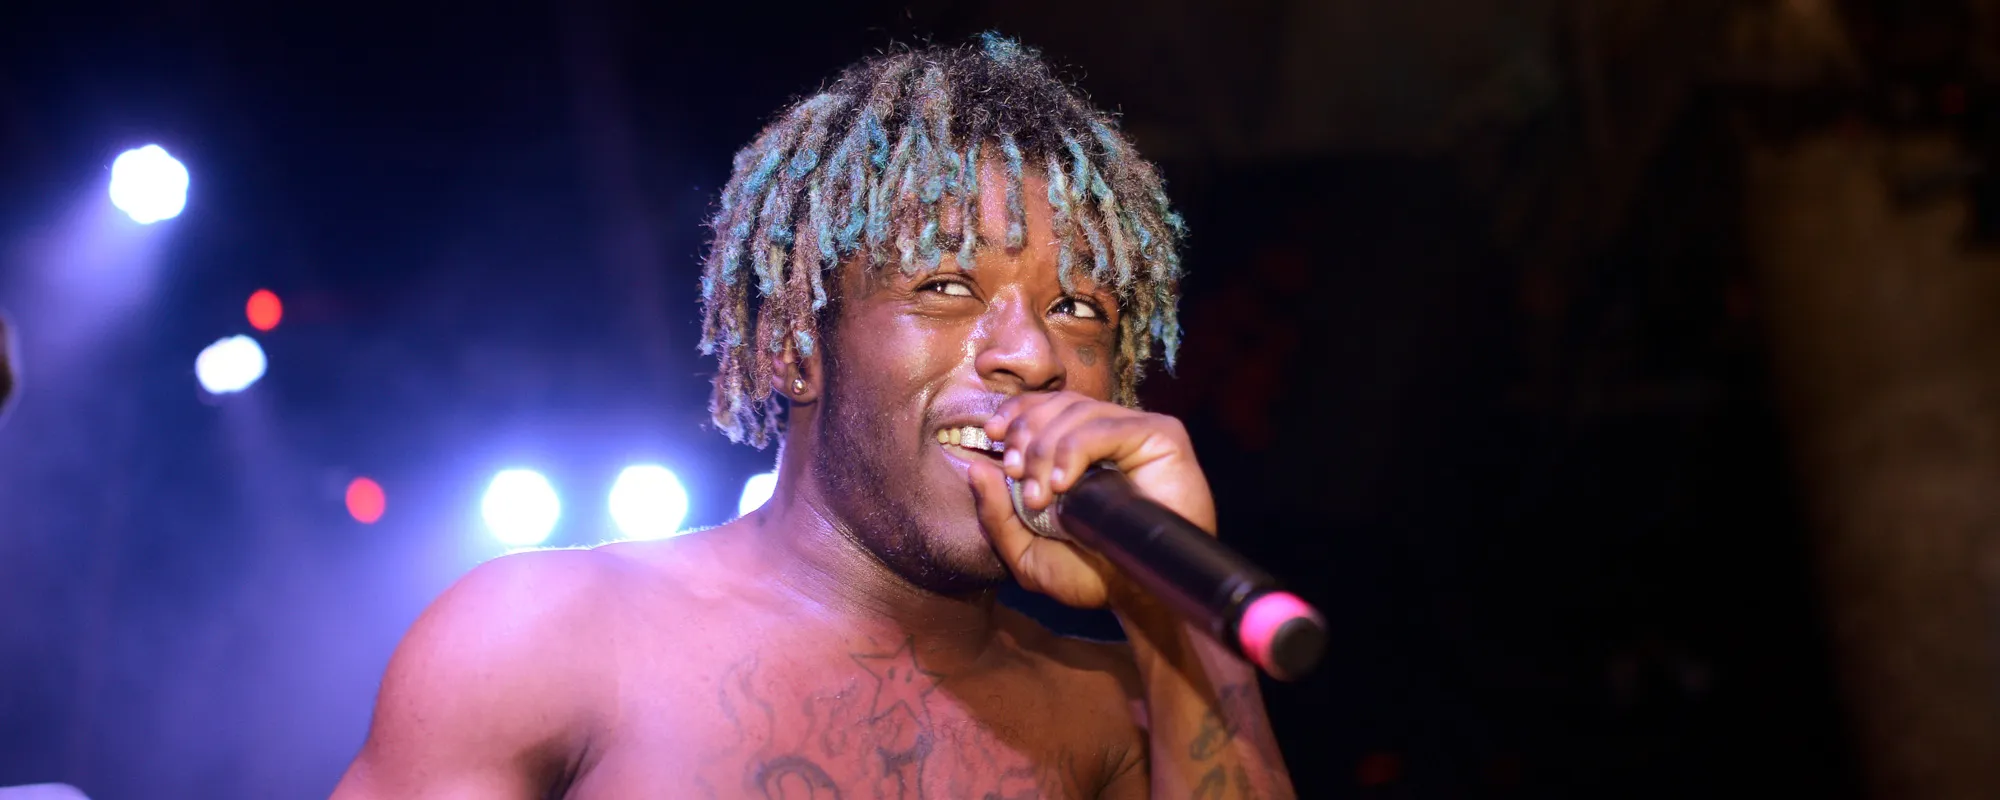 Lil Uzi Vert Confirms New Album is Coming at the “End of the Month”